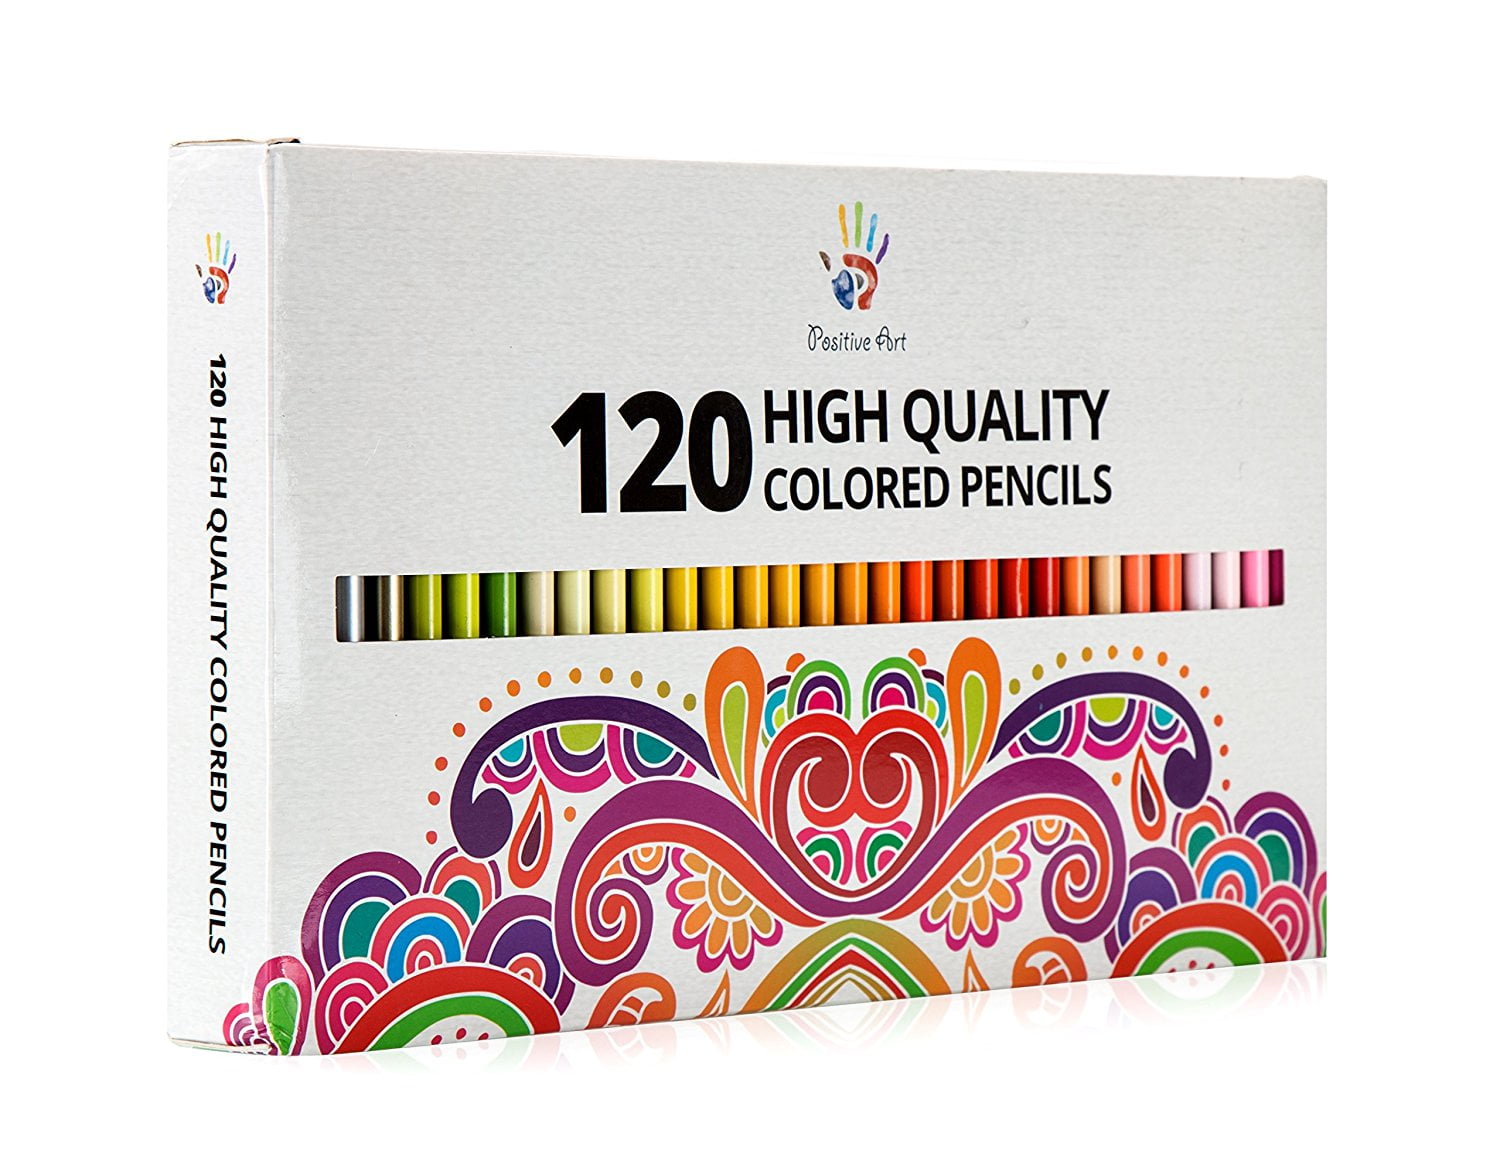  ArtCreativity Multi Colored Pencils - 24 Pack - Pre-Sharpened Coloring  Pencil Set - Color Pencils for School Art Projects, Creative Play, Drawing  - Great Gift Idea for Kids and Adults : Office Products